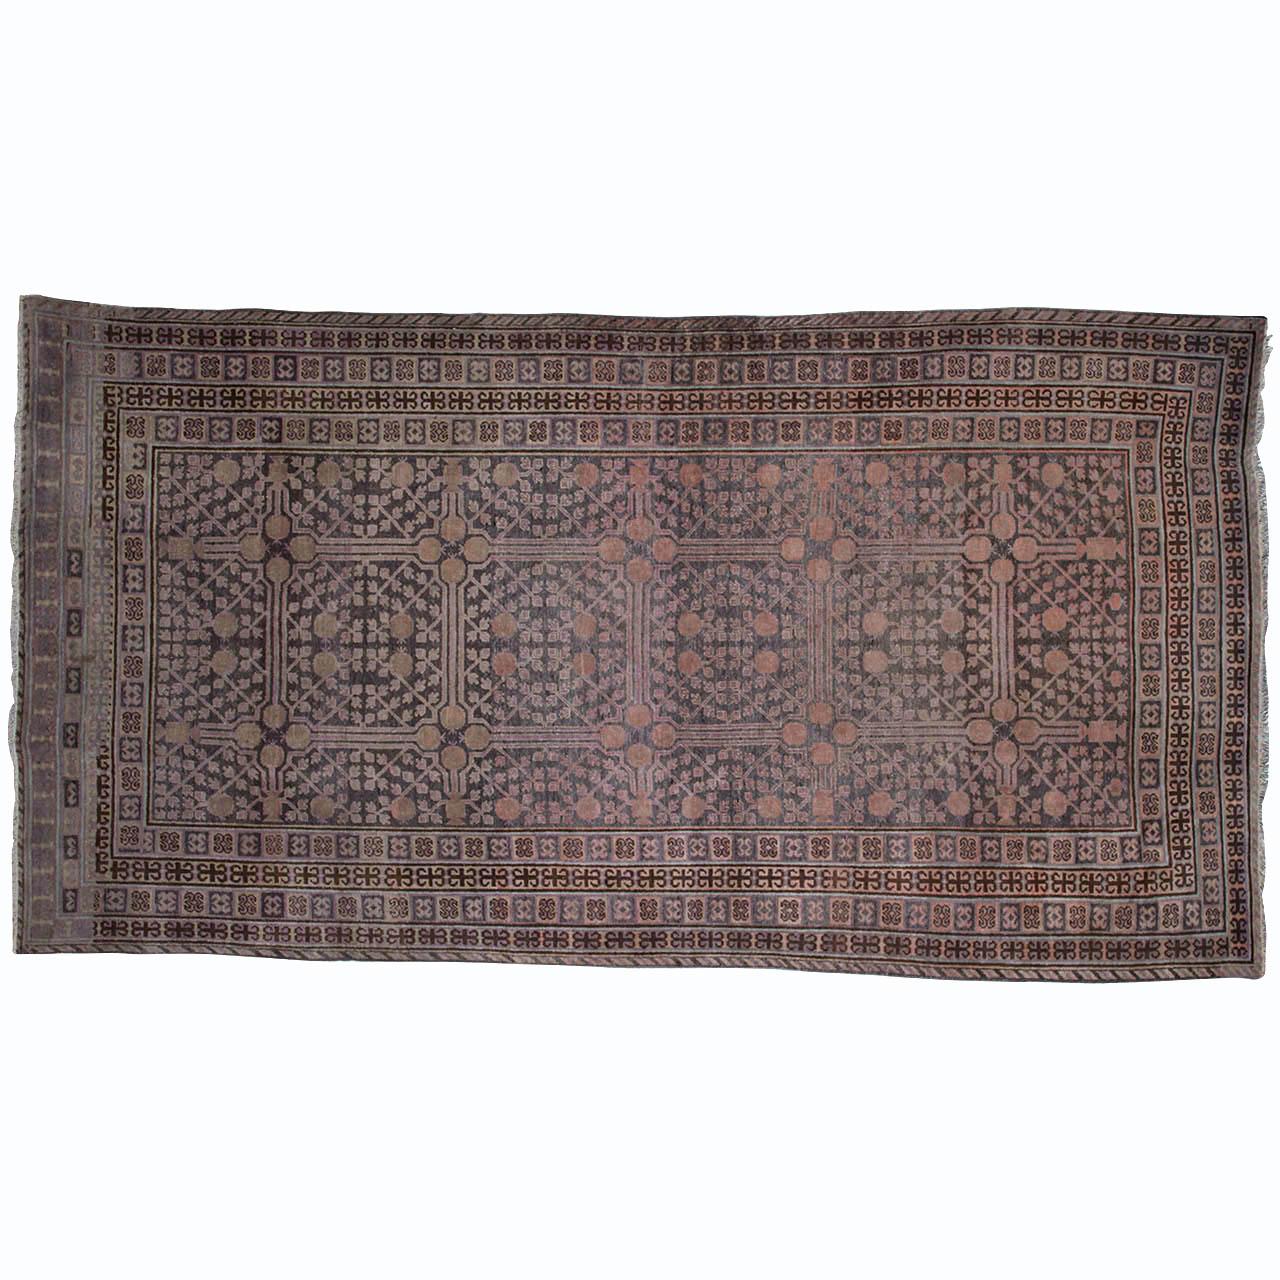 Early 20th Century Rare Antique Kothan Carpet or Rug For Sale